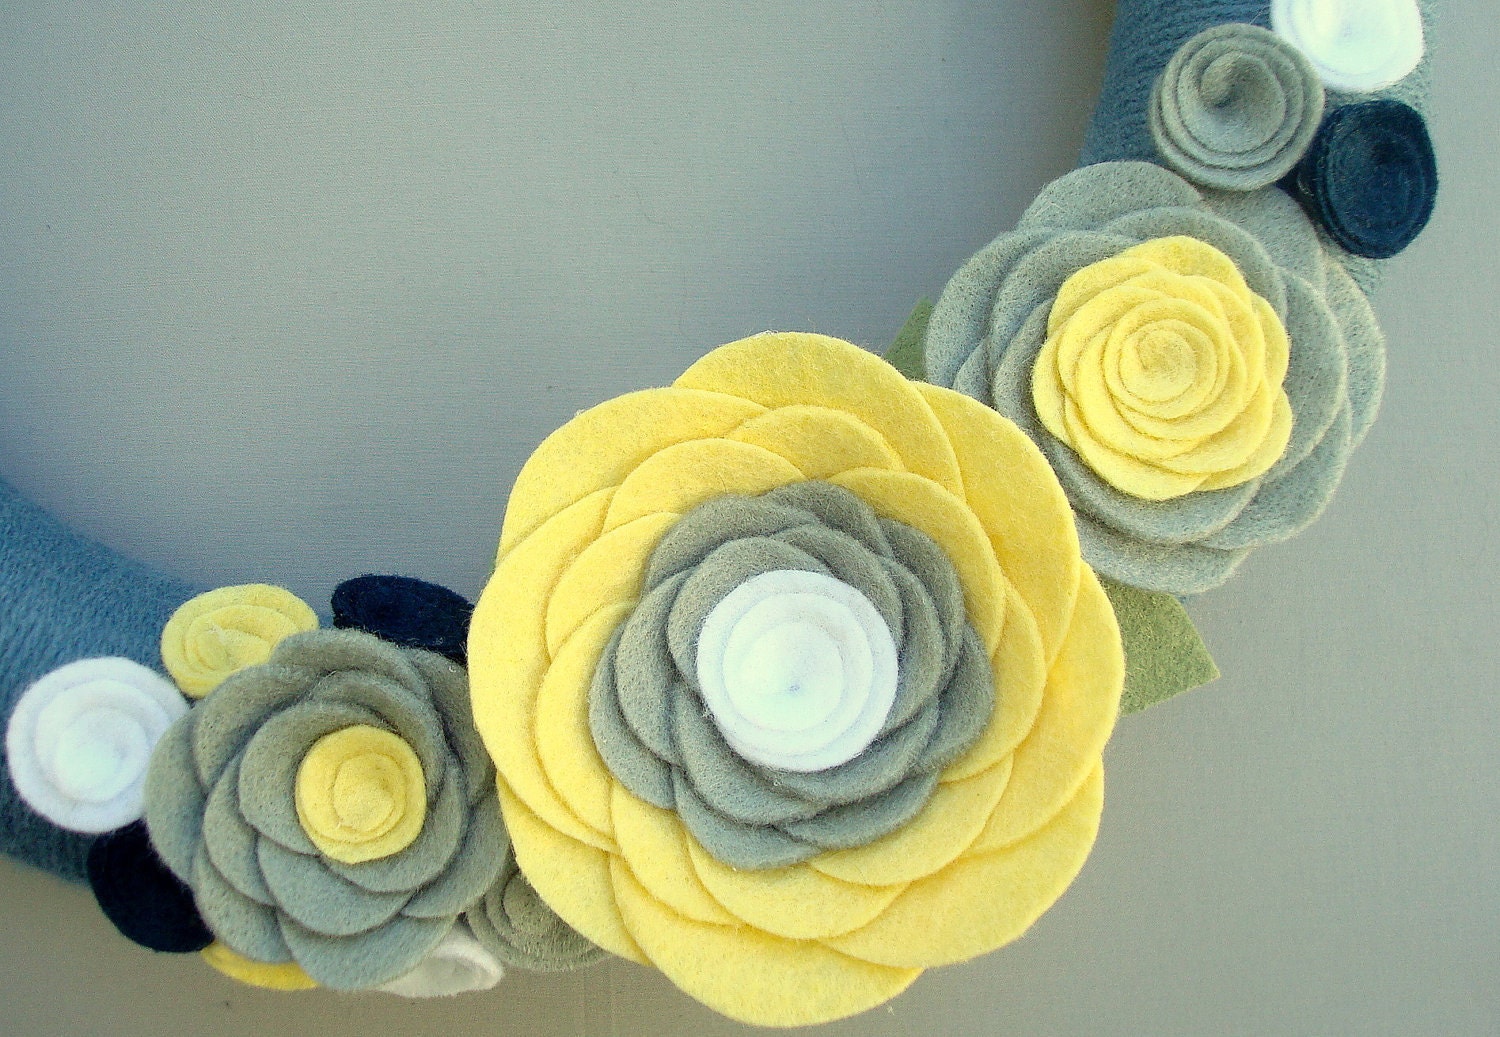 Blue Wreath Yarn and Felt Flowers.  12 "- blue, pale yellow, light gray, white, and navy - Clouds in the Sunshine